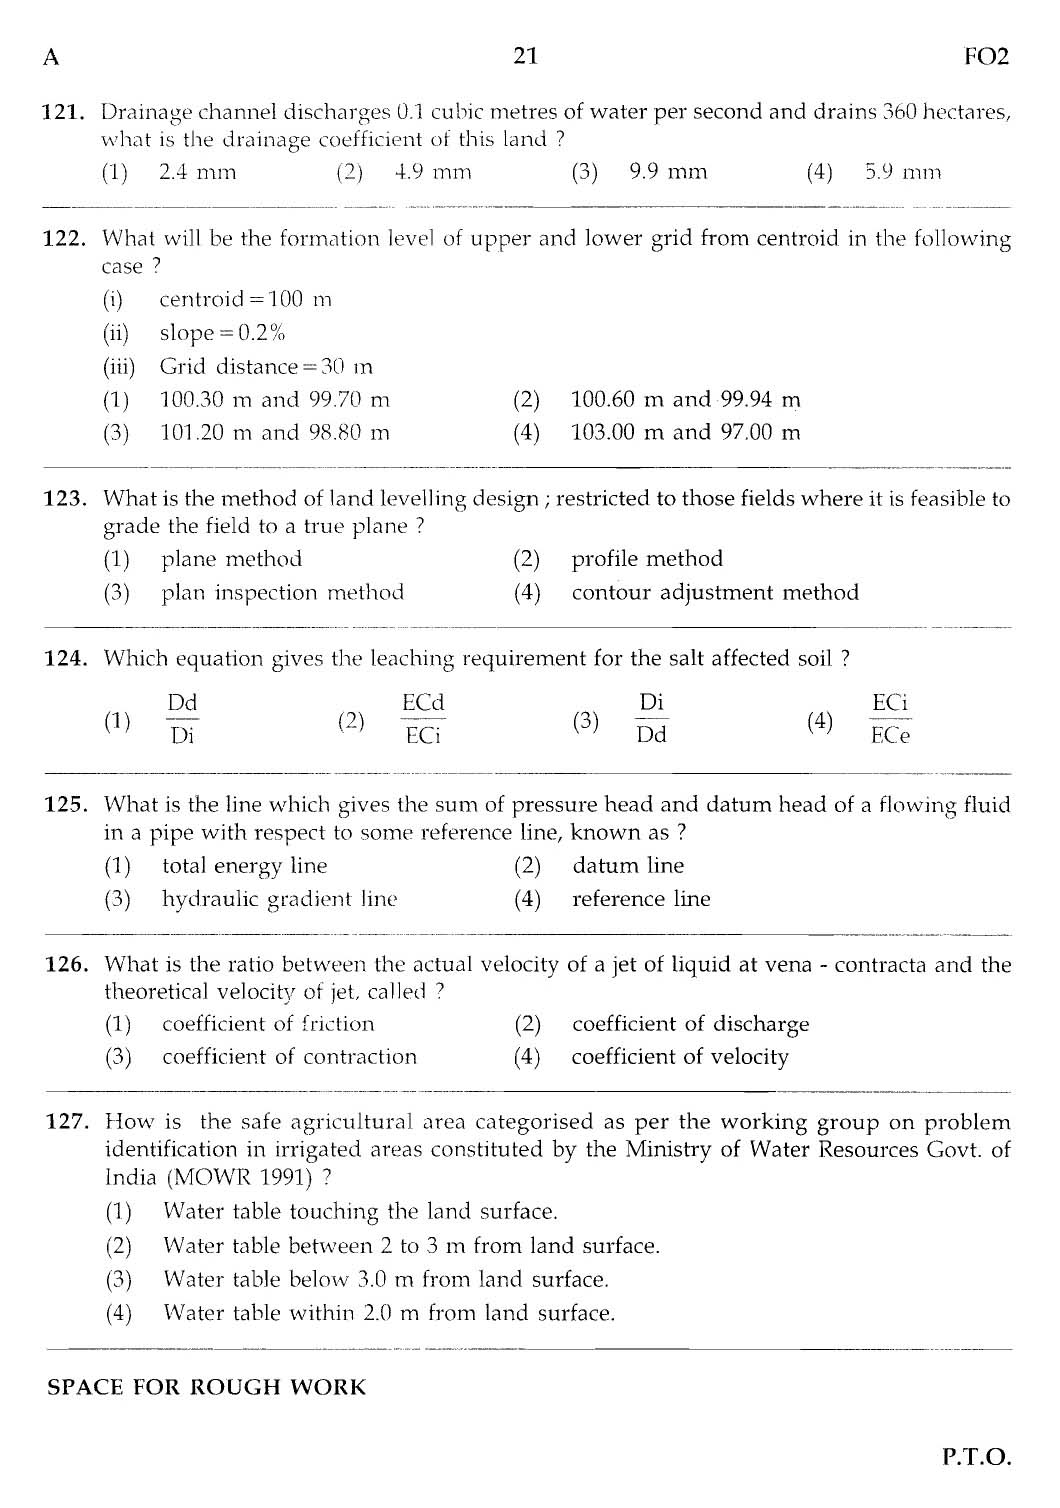 MPSC Agricultural Services Main Exam 2012 Question Paper Agricultural Engineering 20